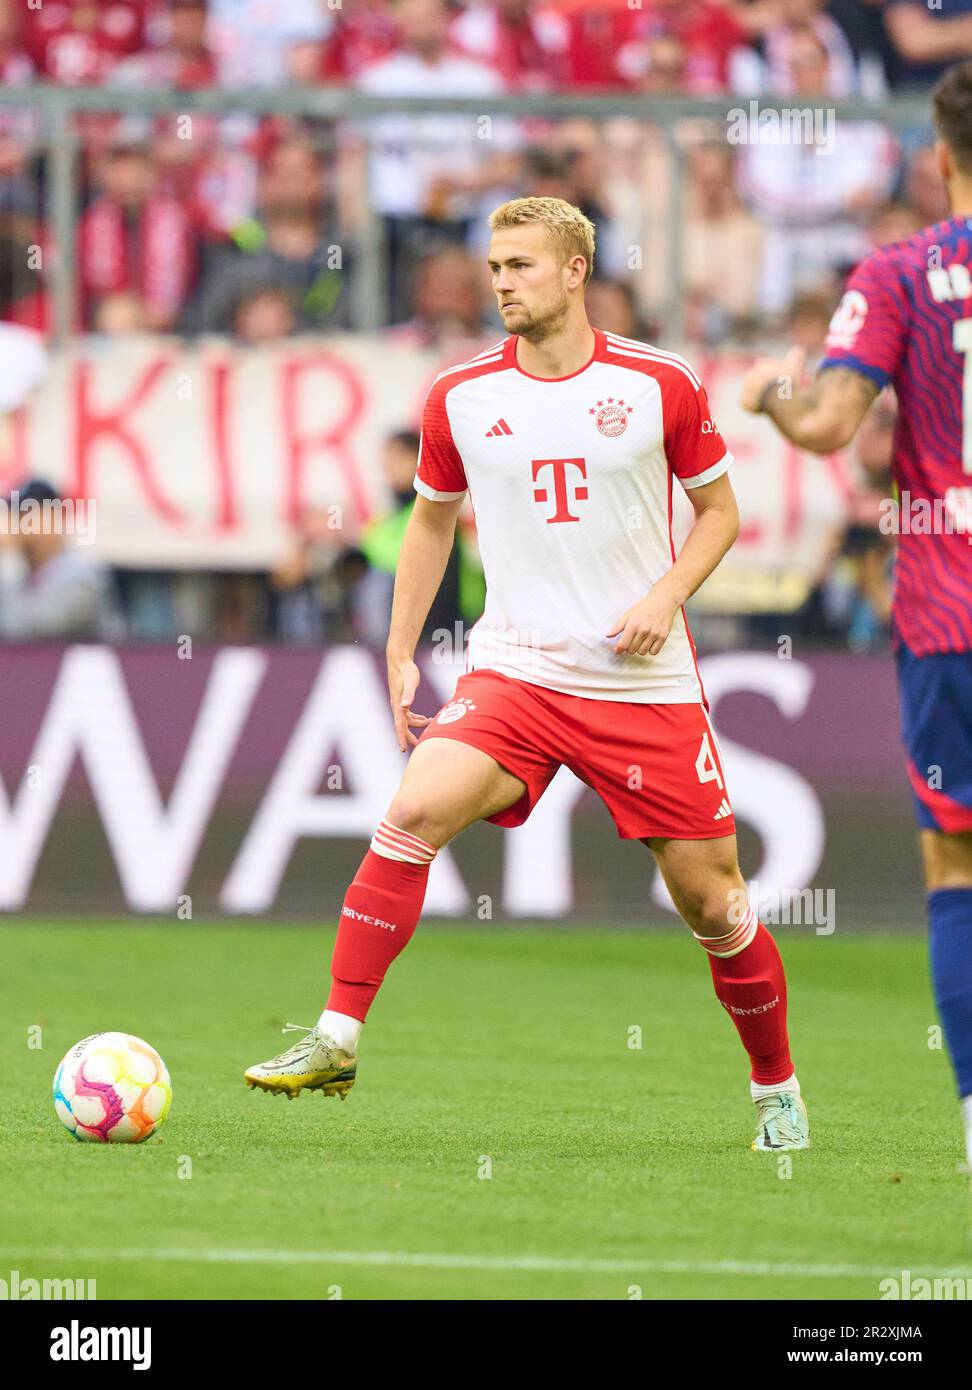 Matthijs de Ligt, FCB 4  in the match FC BAYERN MUENCHEN - RB LEIPZIG 1-3 1.German Football League on May 20, 2023 in Munich, Germany. Season 2022/2023, matchday 33, 1.Bundesliga, FCB, München, 33.Spieltag. © Peter Schatz / Alamy Live News    - DFL REGULATIONS PROHIBIT ANY USE OF PHOTOGRAPHS as IMAGE SEQUENCES and/or QUASI-VIDEO - Stock Photo